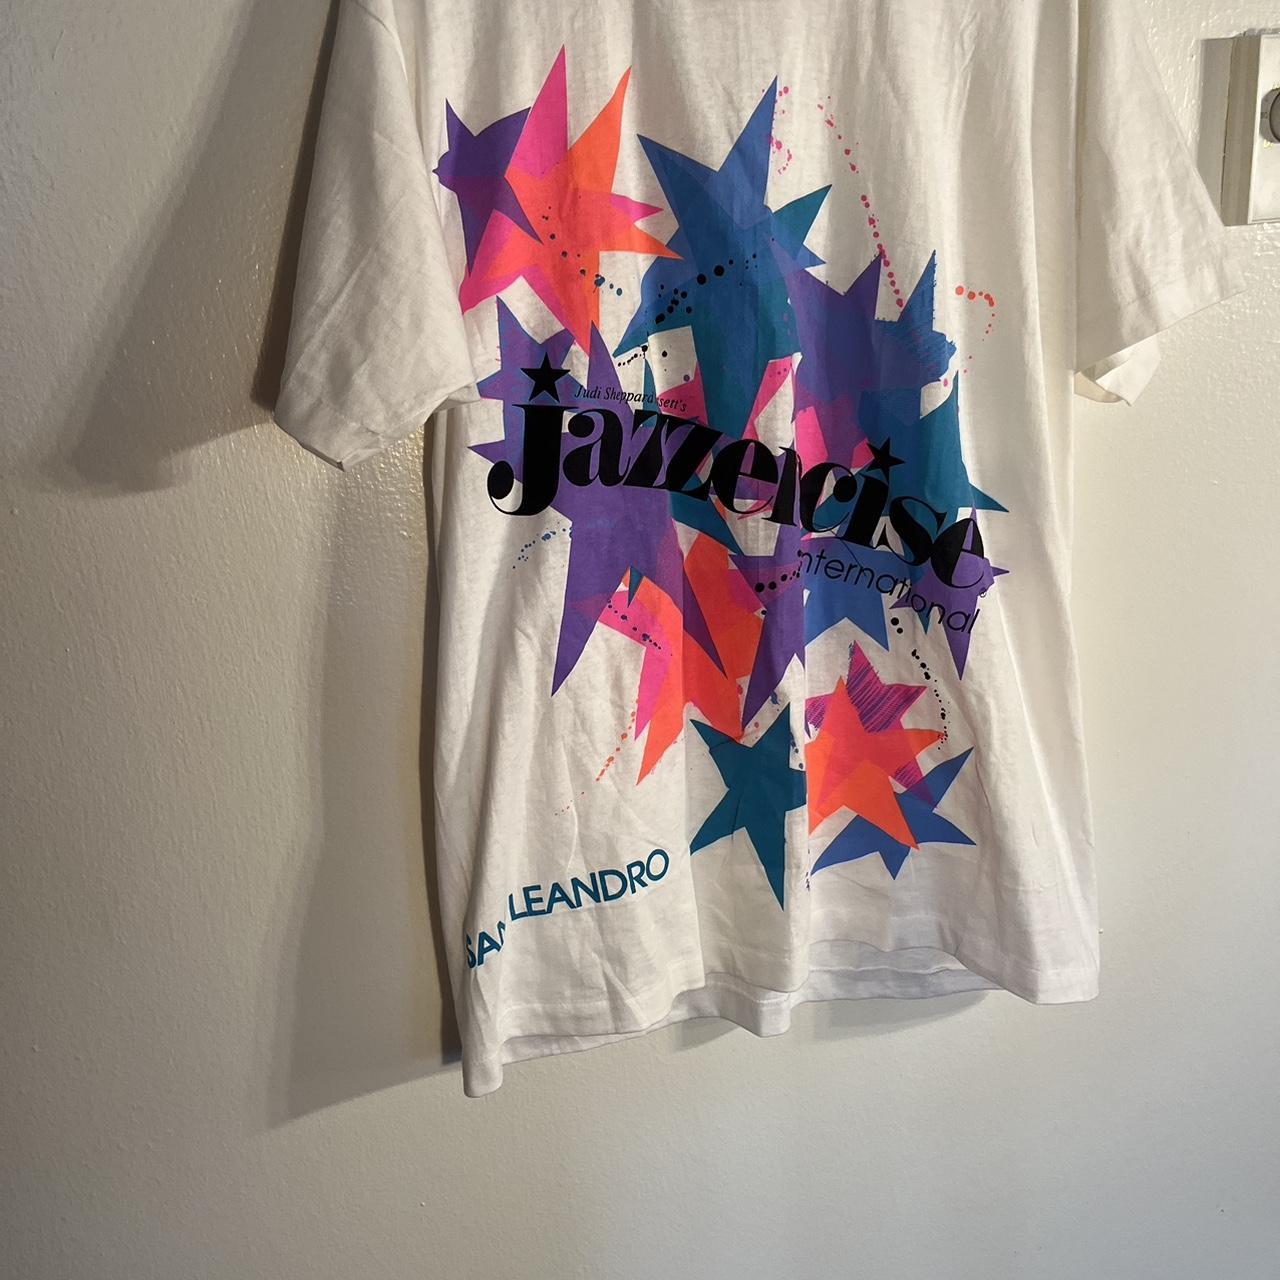 Vintage 91' jazzercise merch from San Leandro - Depop